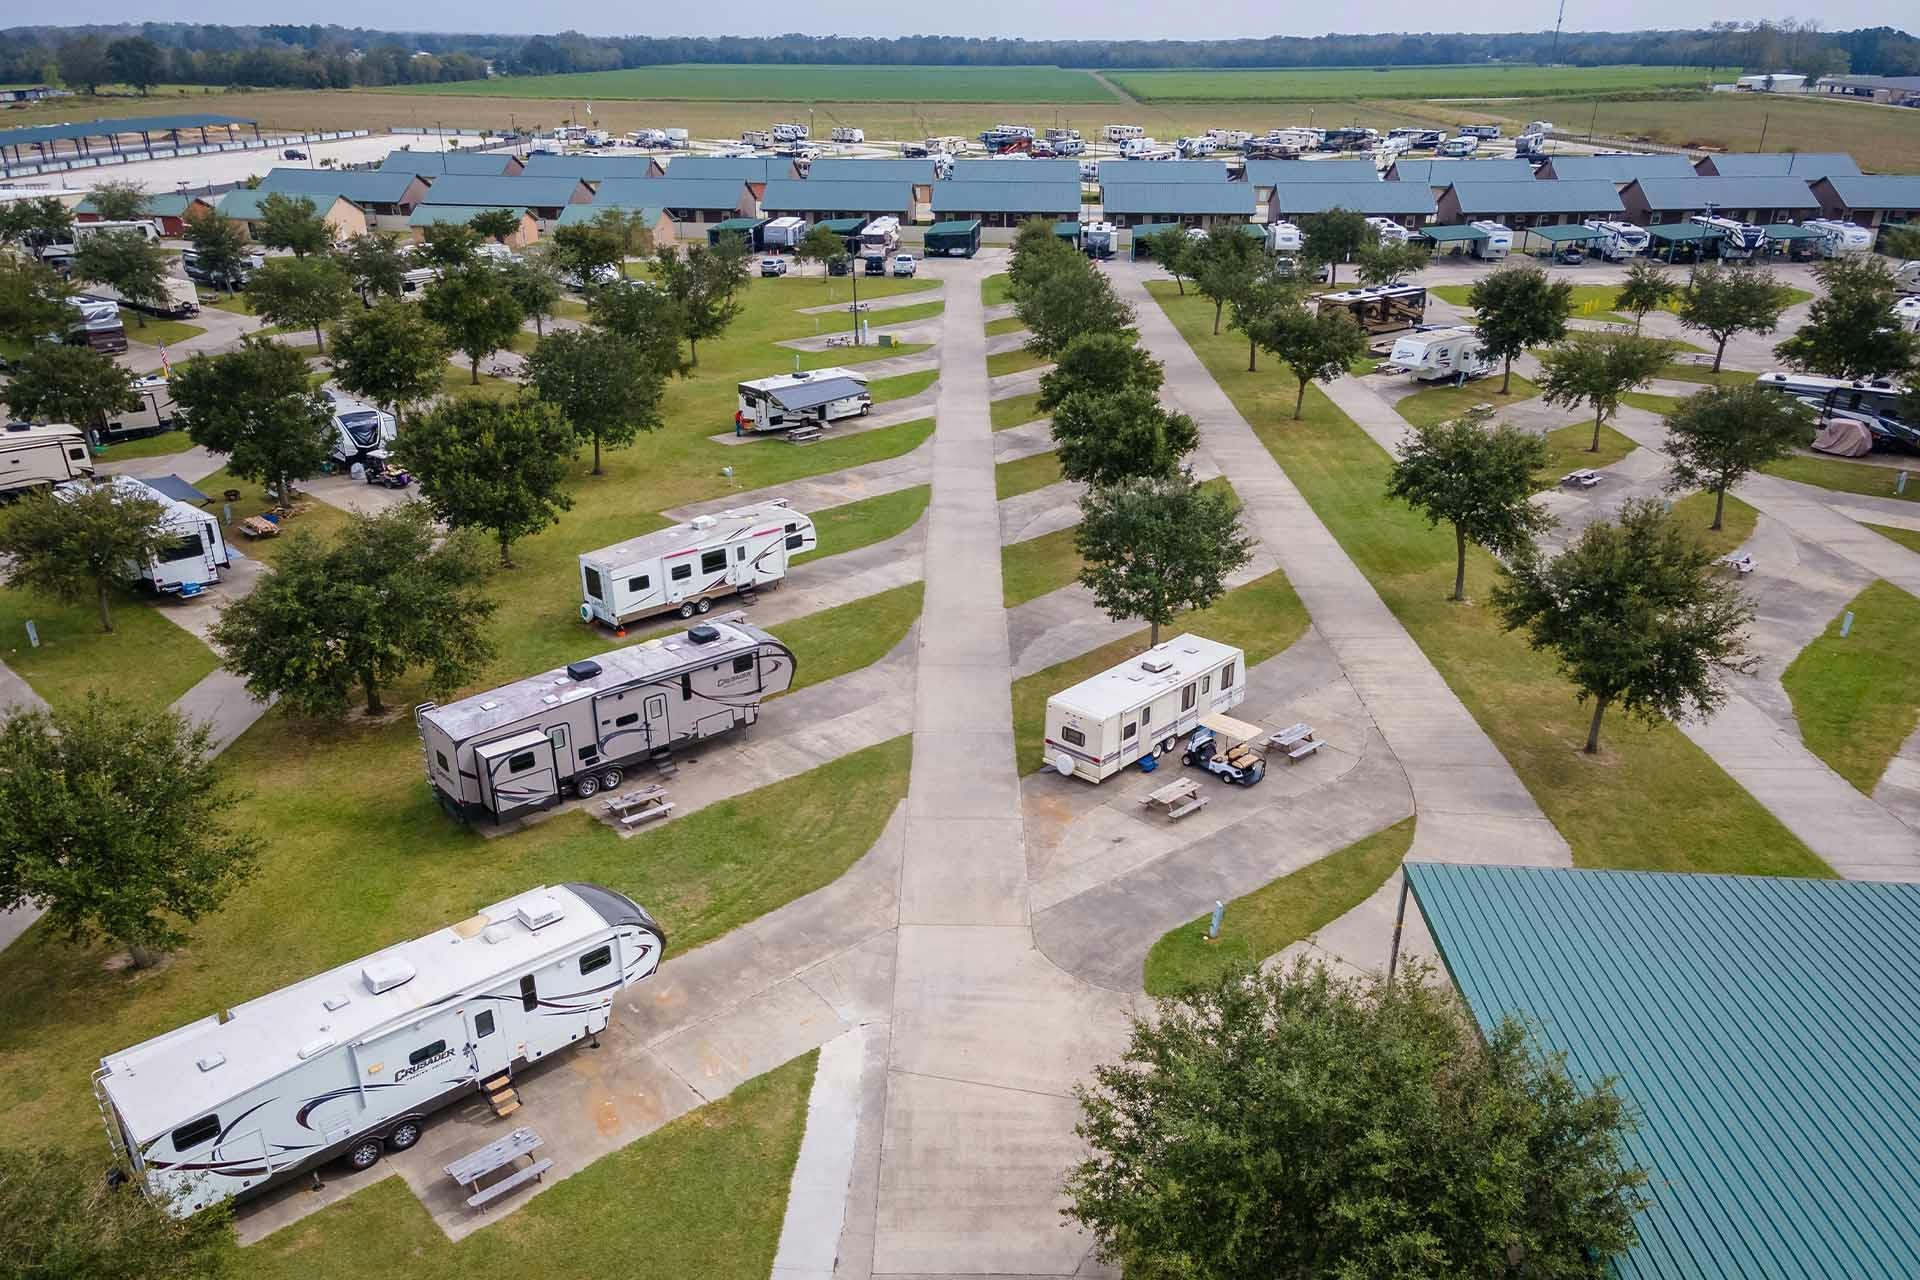 Top 10 Campgrounds in Louisiana